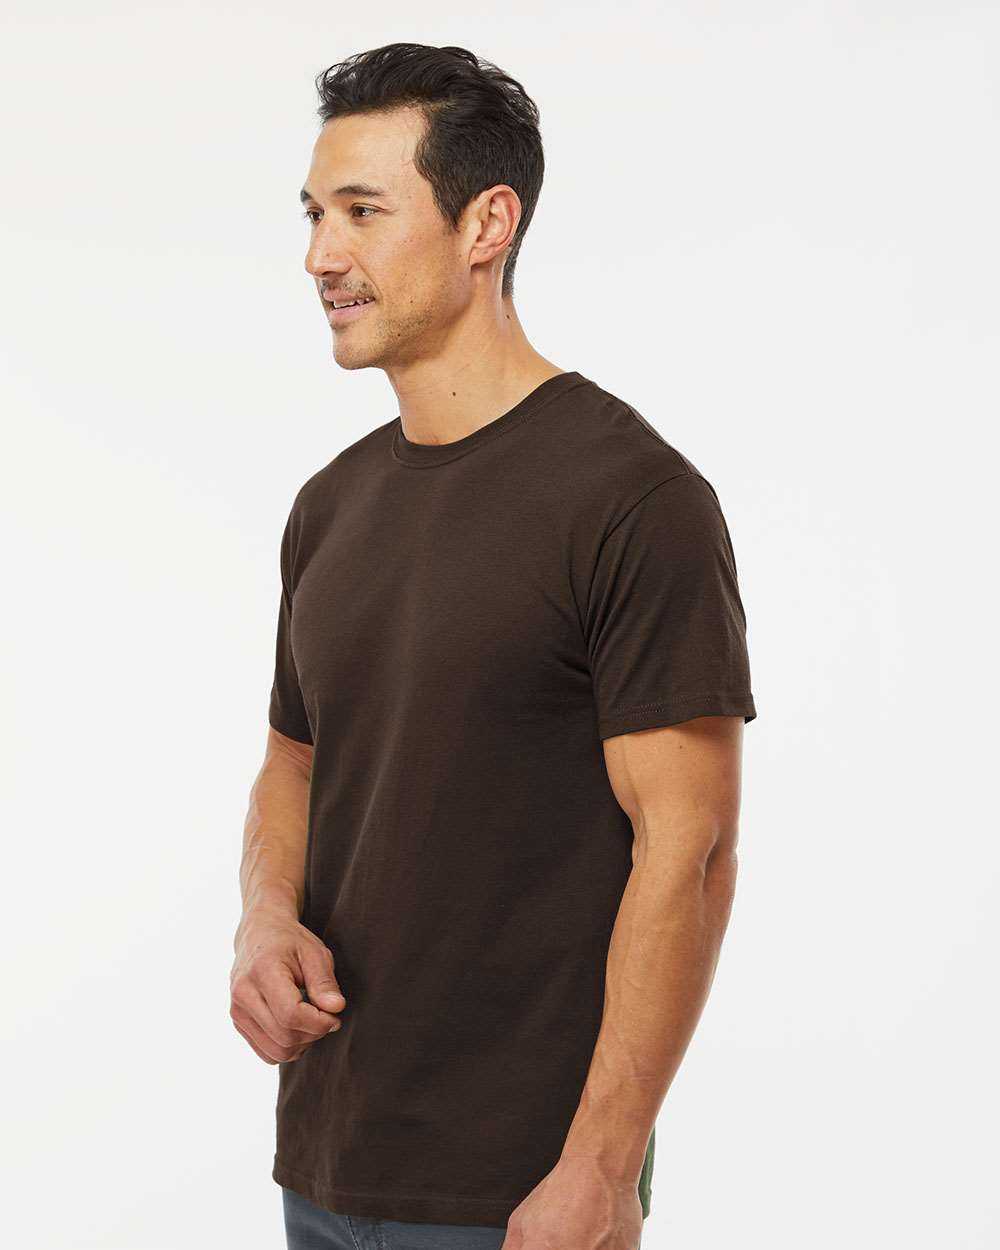 M&O 4800 Gold Soft Touch T-Shirt - Chocolate